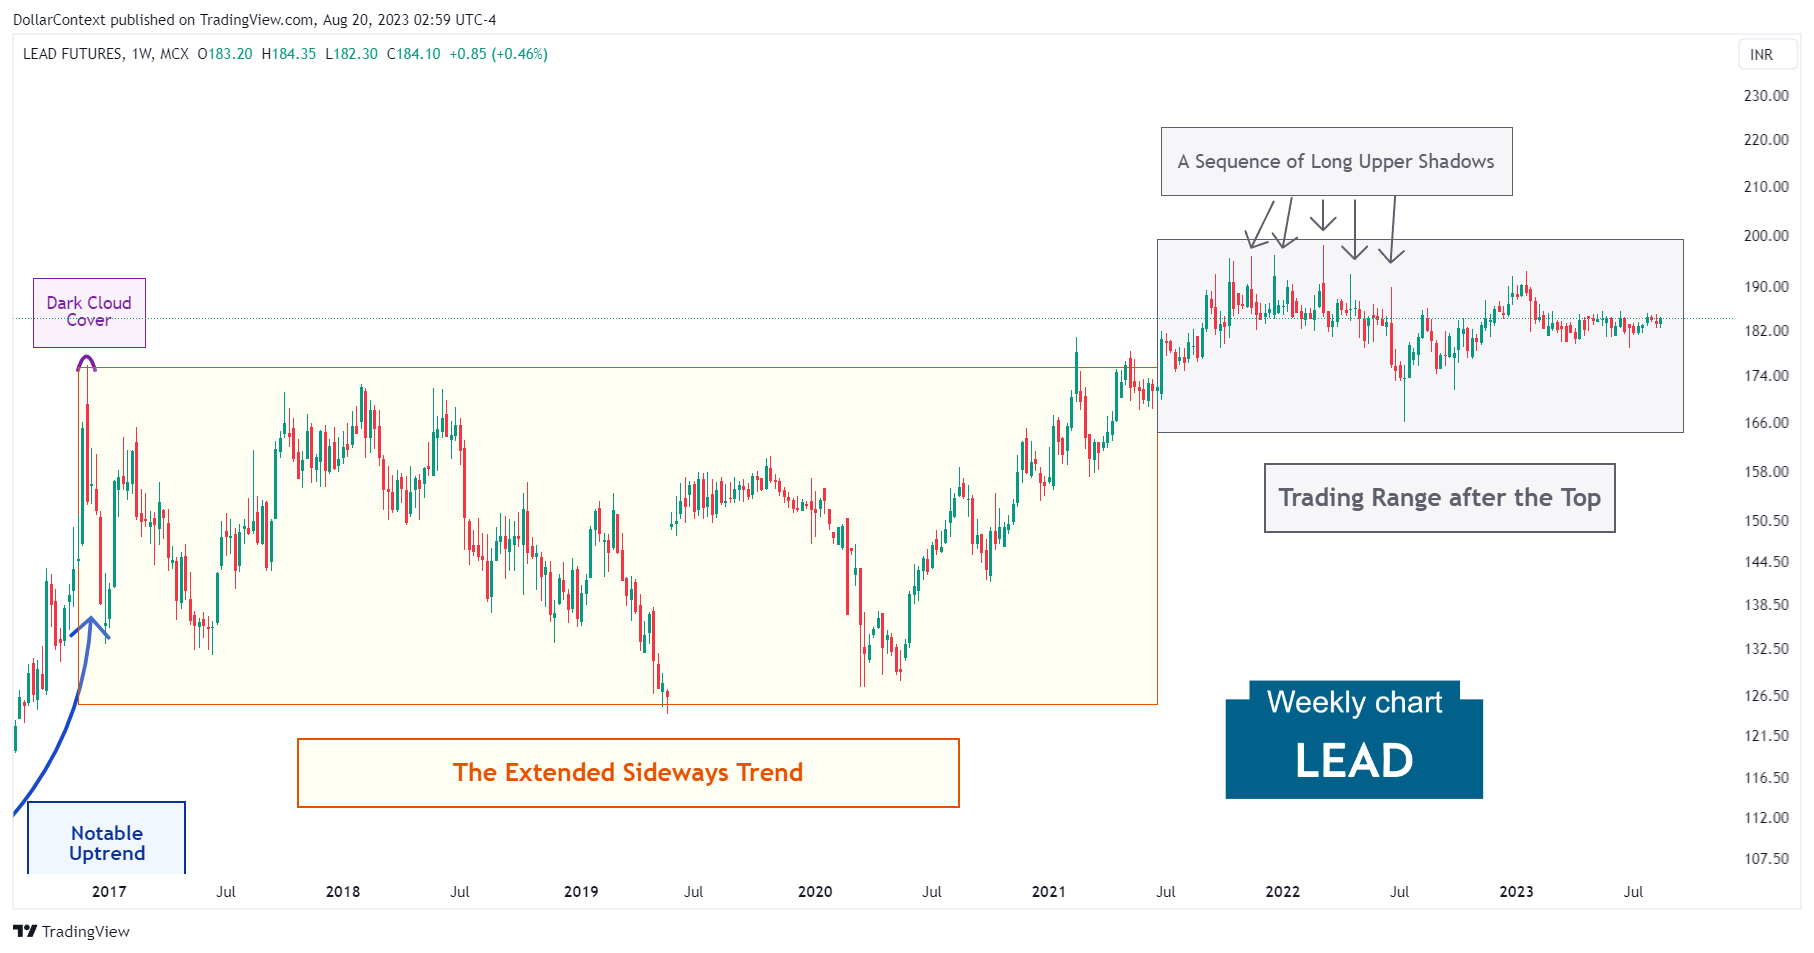 Lead Futures: The Top in 2022 (Weekly Chart)